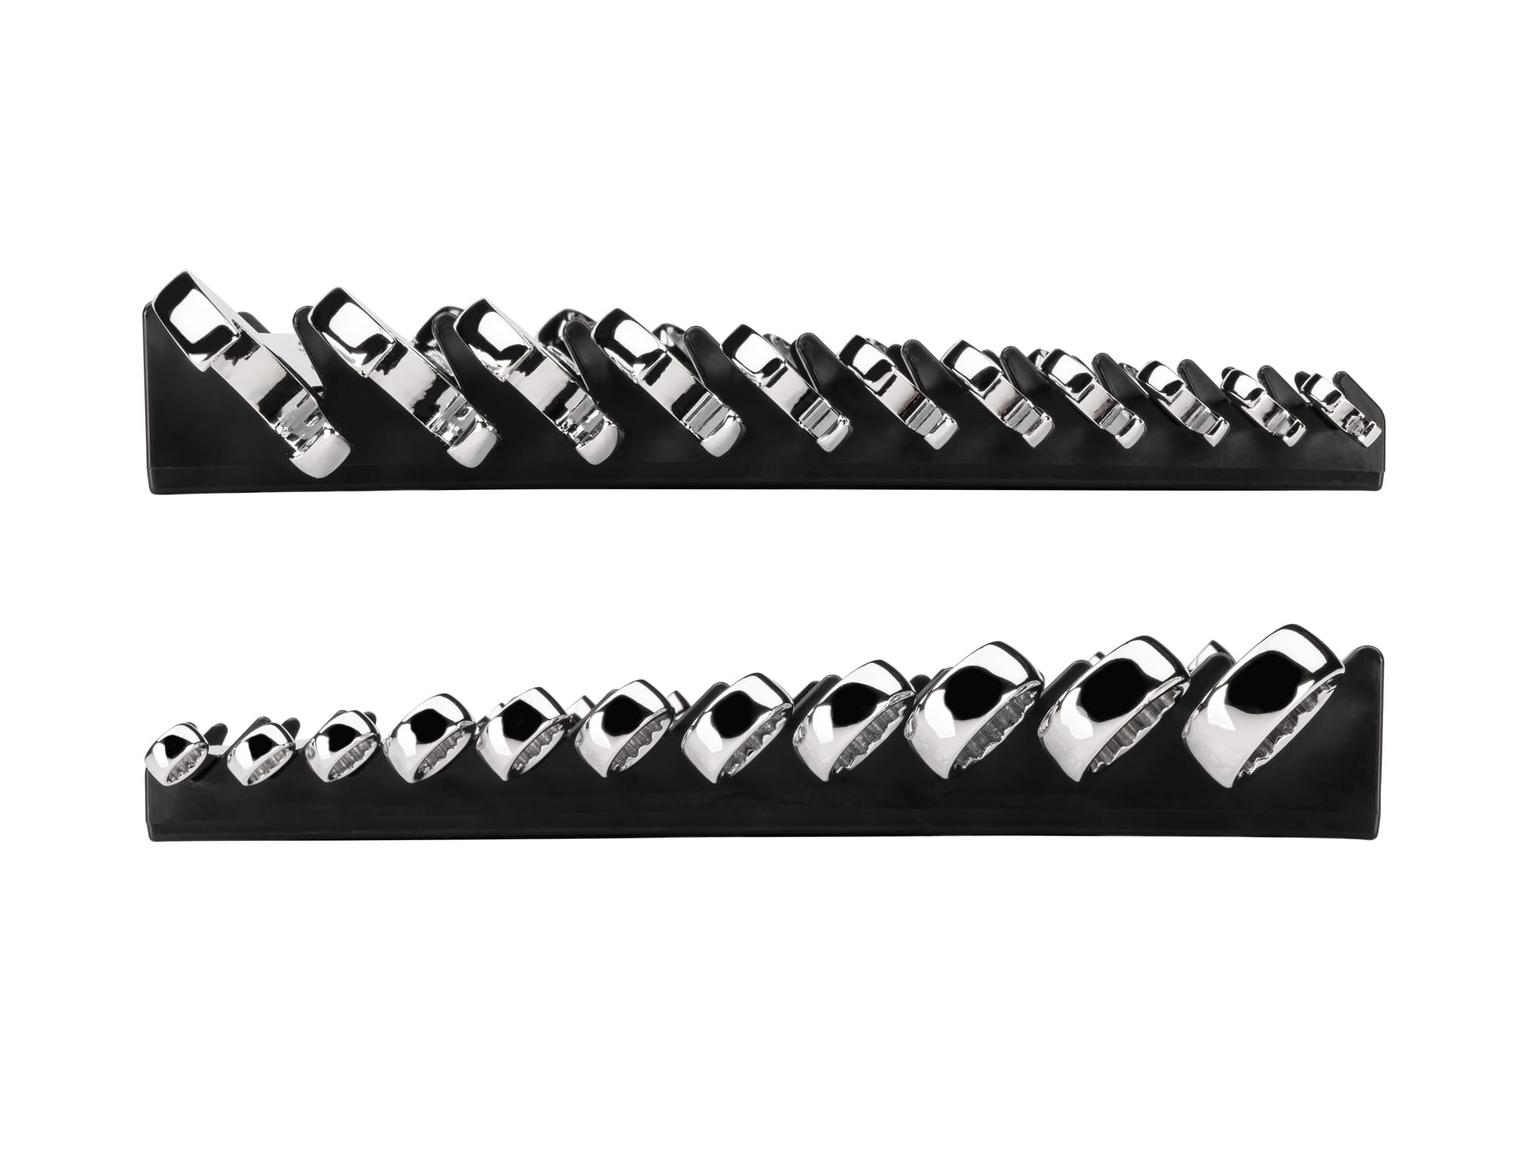 TEKTON WCB91103-T Combination Wrench Set with Rack, 11-Piece (1/4 - 3/4 in.)